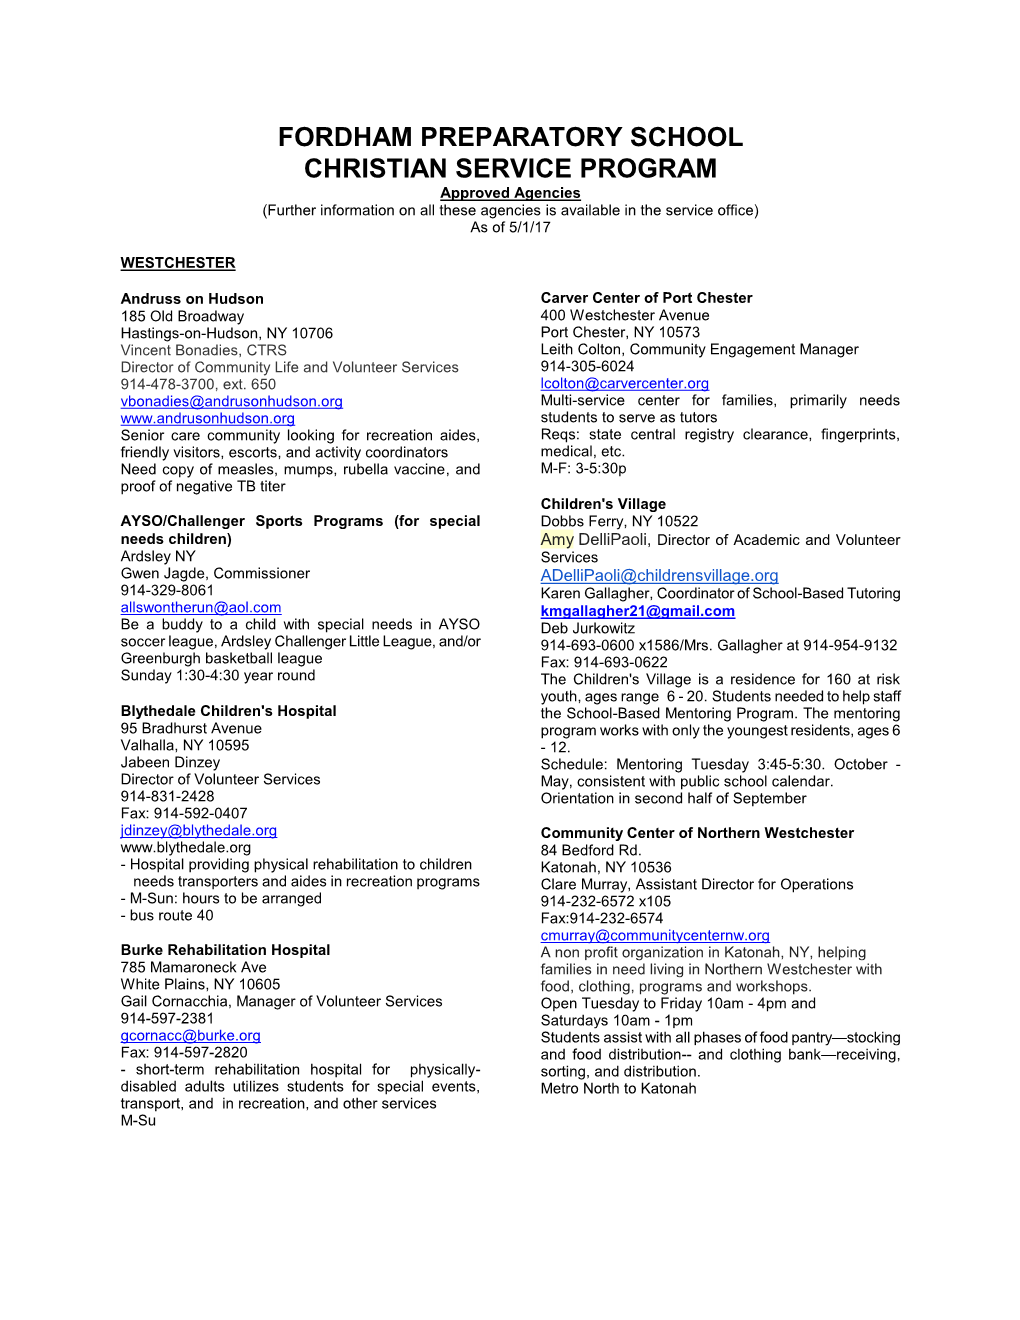 FORDHAM PREPARATORY SCHOOL CHRISTIAN SERVICE PROGRAM Approved Agencies (Further Information on All These Agencies Is Available in the Service Office) As of 5/1/17